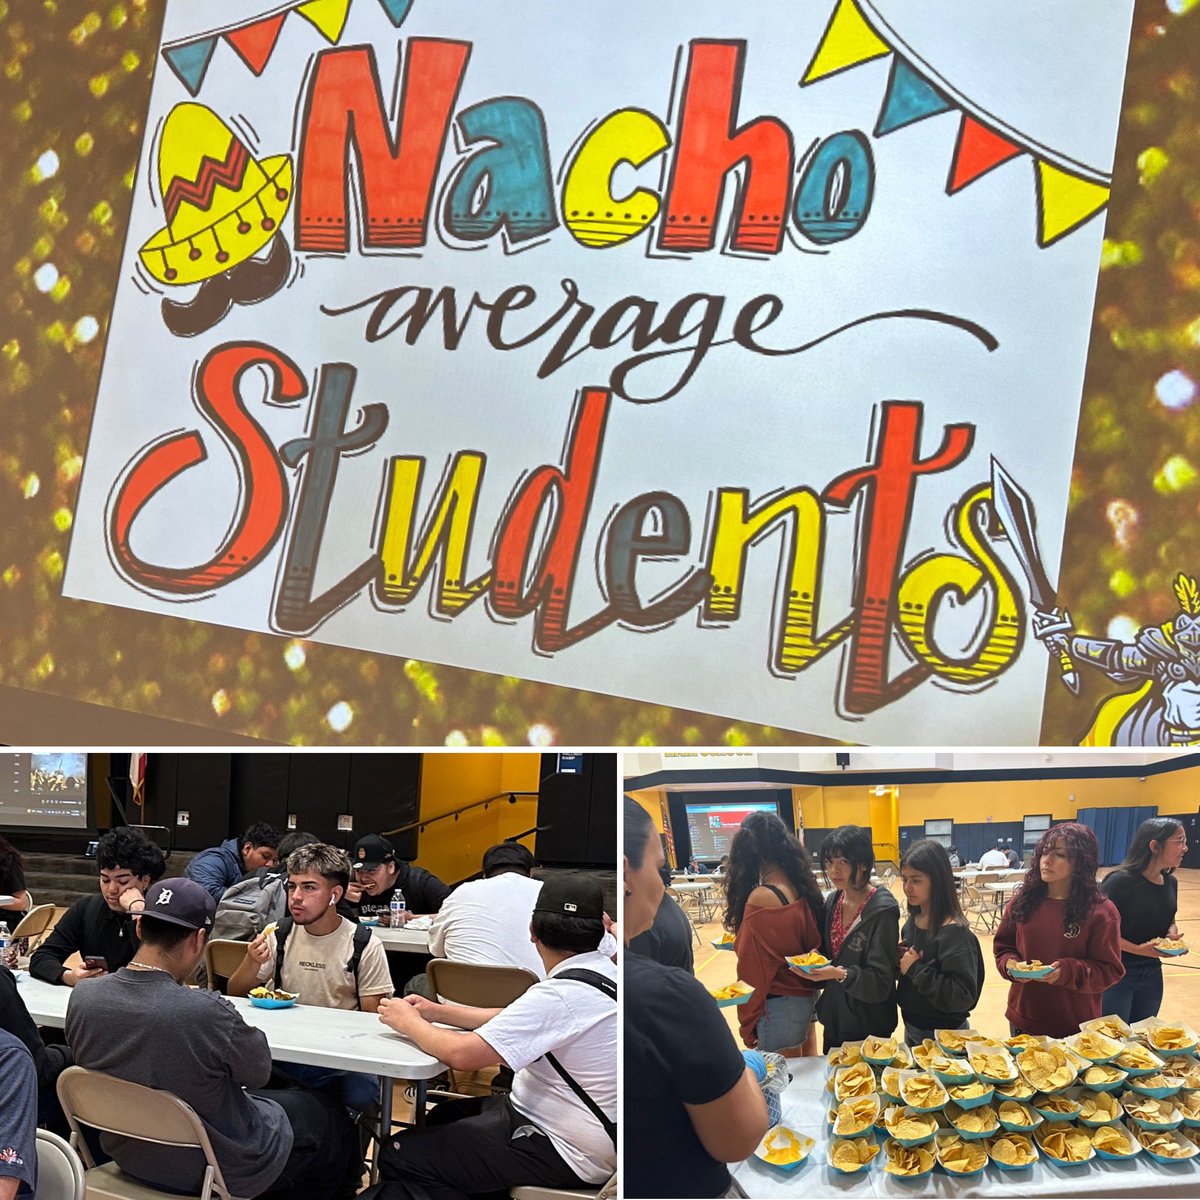 Today, all students who showed up to all CAASPP testing days enjoyed a Loaded Nacho luncheon! 👏🏽👏🏽👏🏽